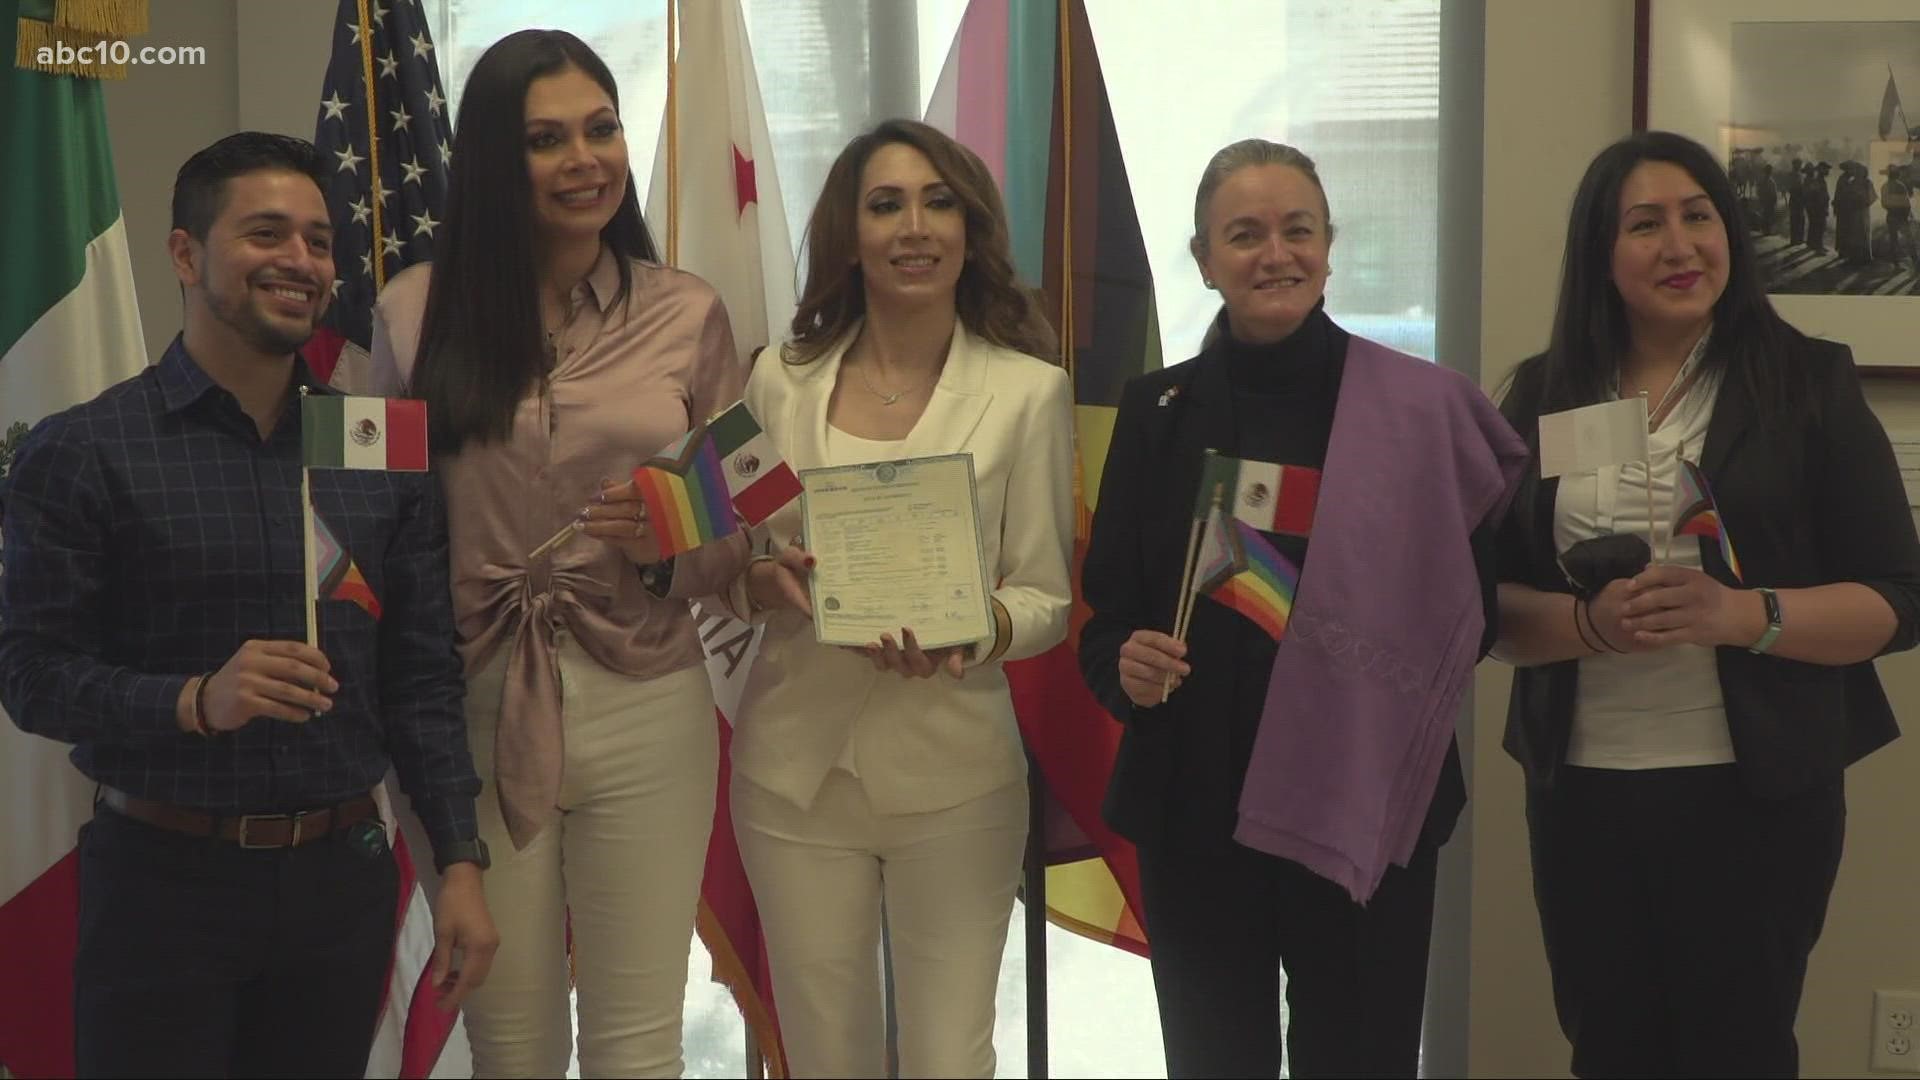 The Consulate General of Mexico in Sacramento issued the first amended birth certificate recognizing the gender identity of a transgender person.